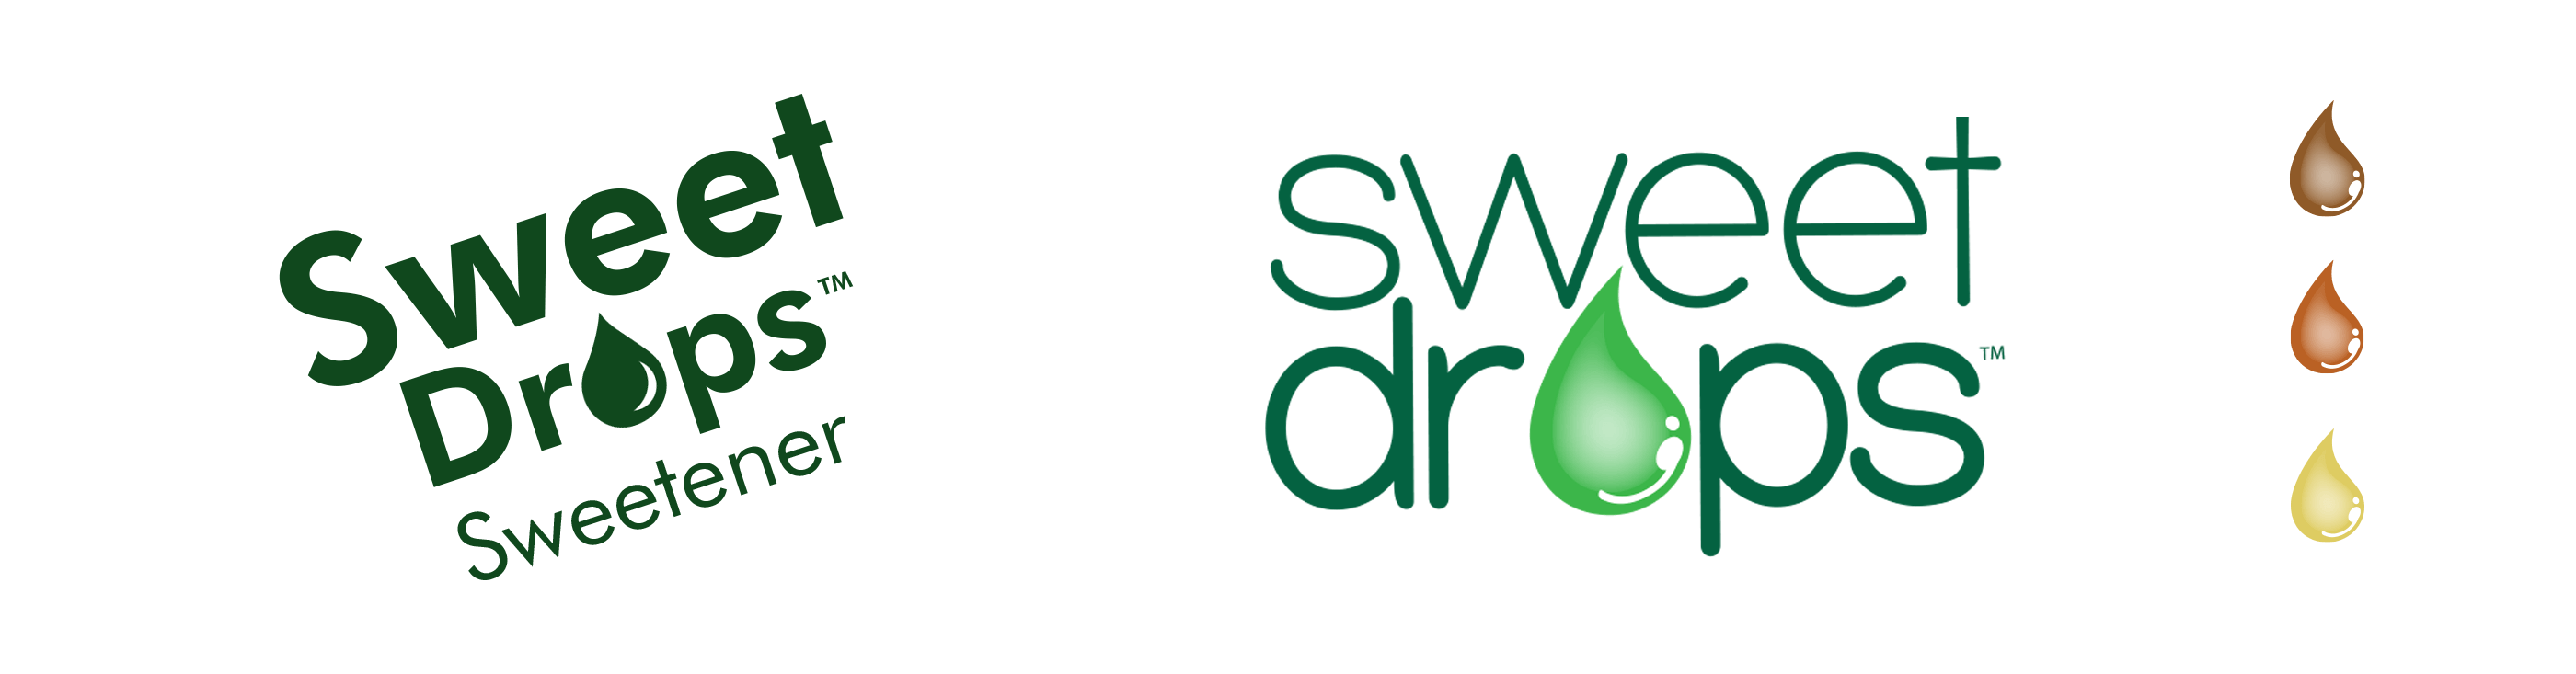 sweet drops logo redesign